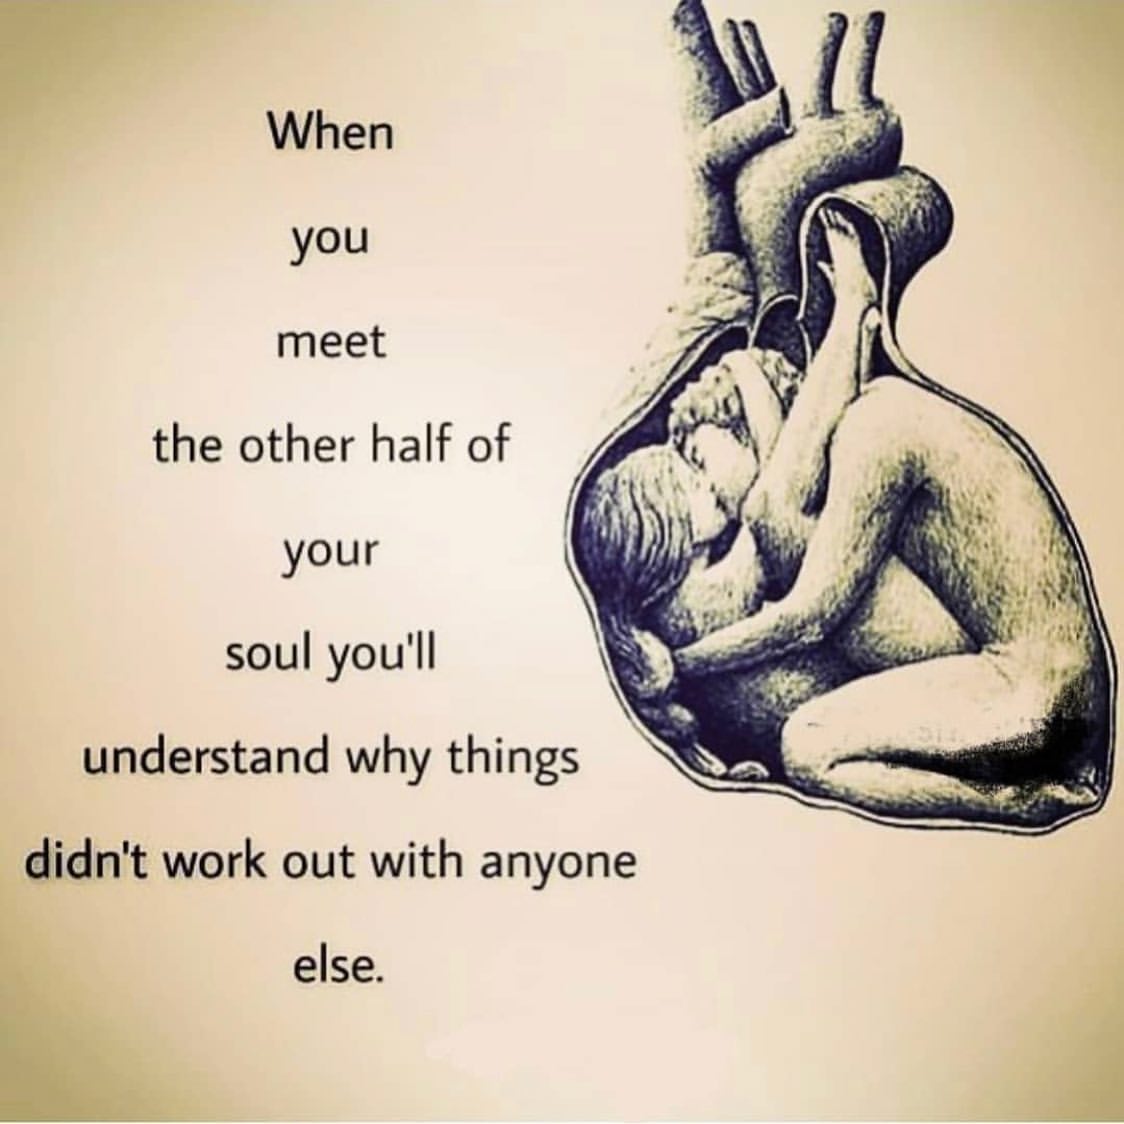 When you meet the other half of your soul you'll understand why things didn't work out with anyone else.